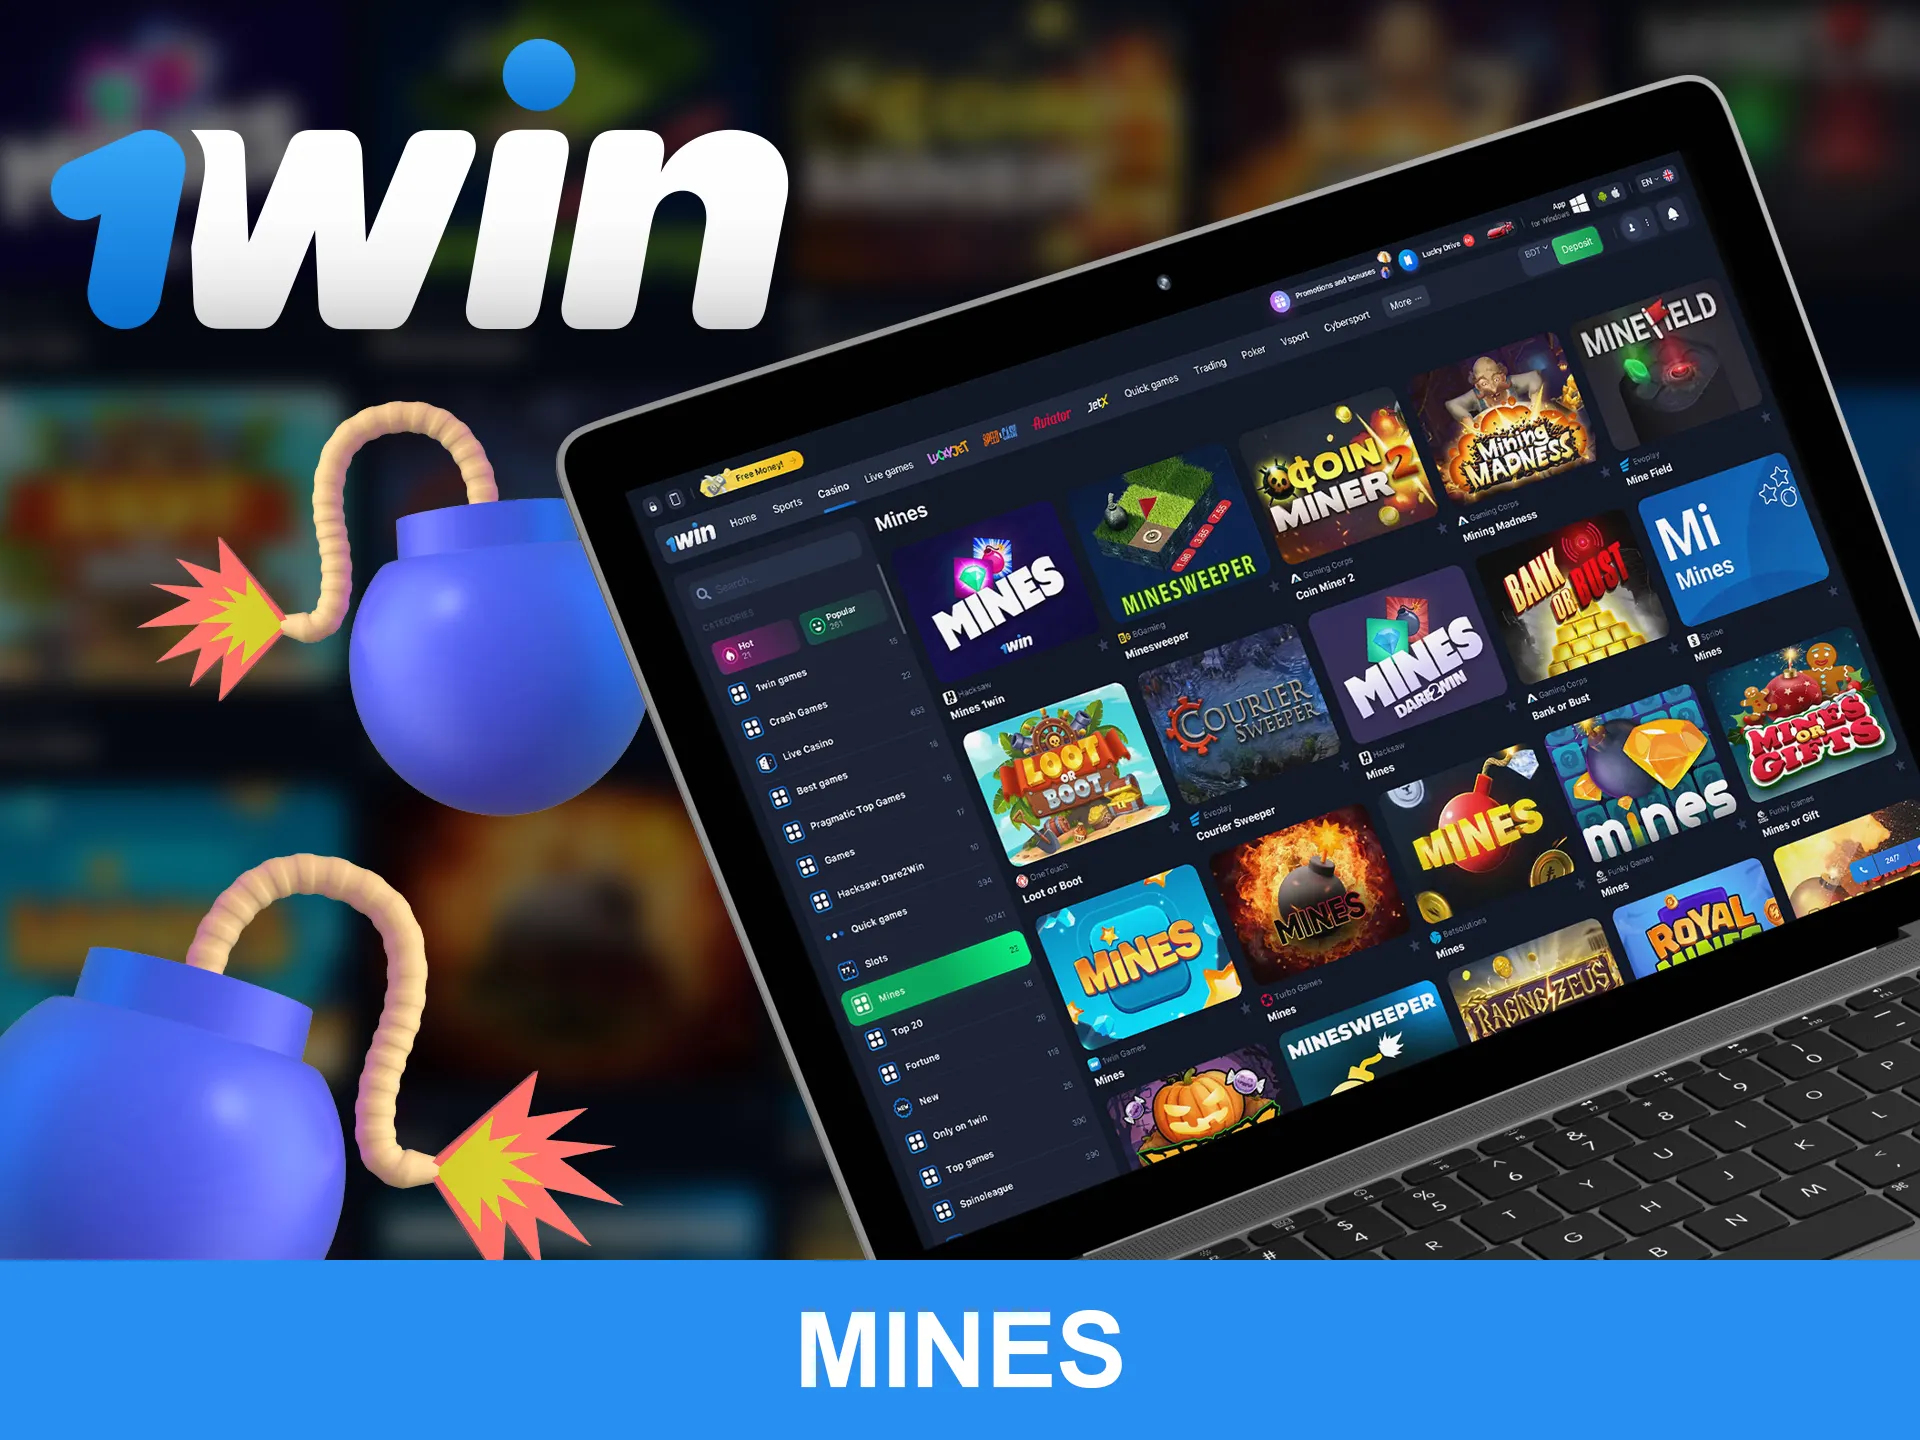 Avoid mines to become a winner at 1win.